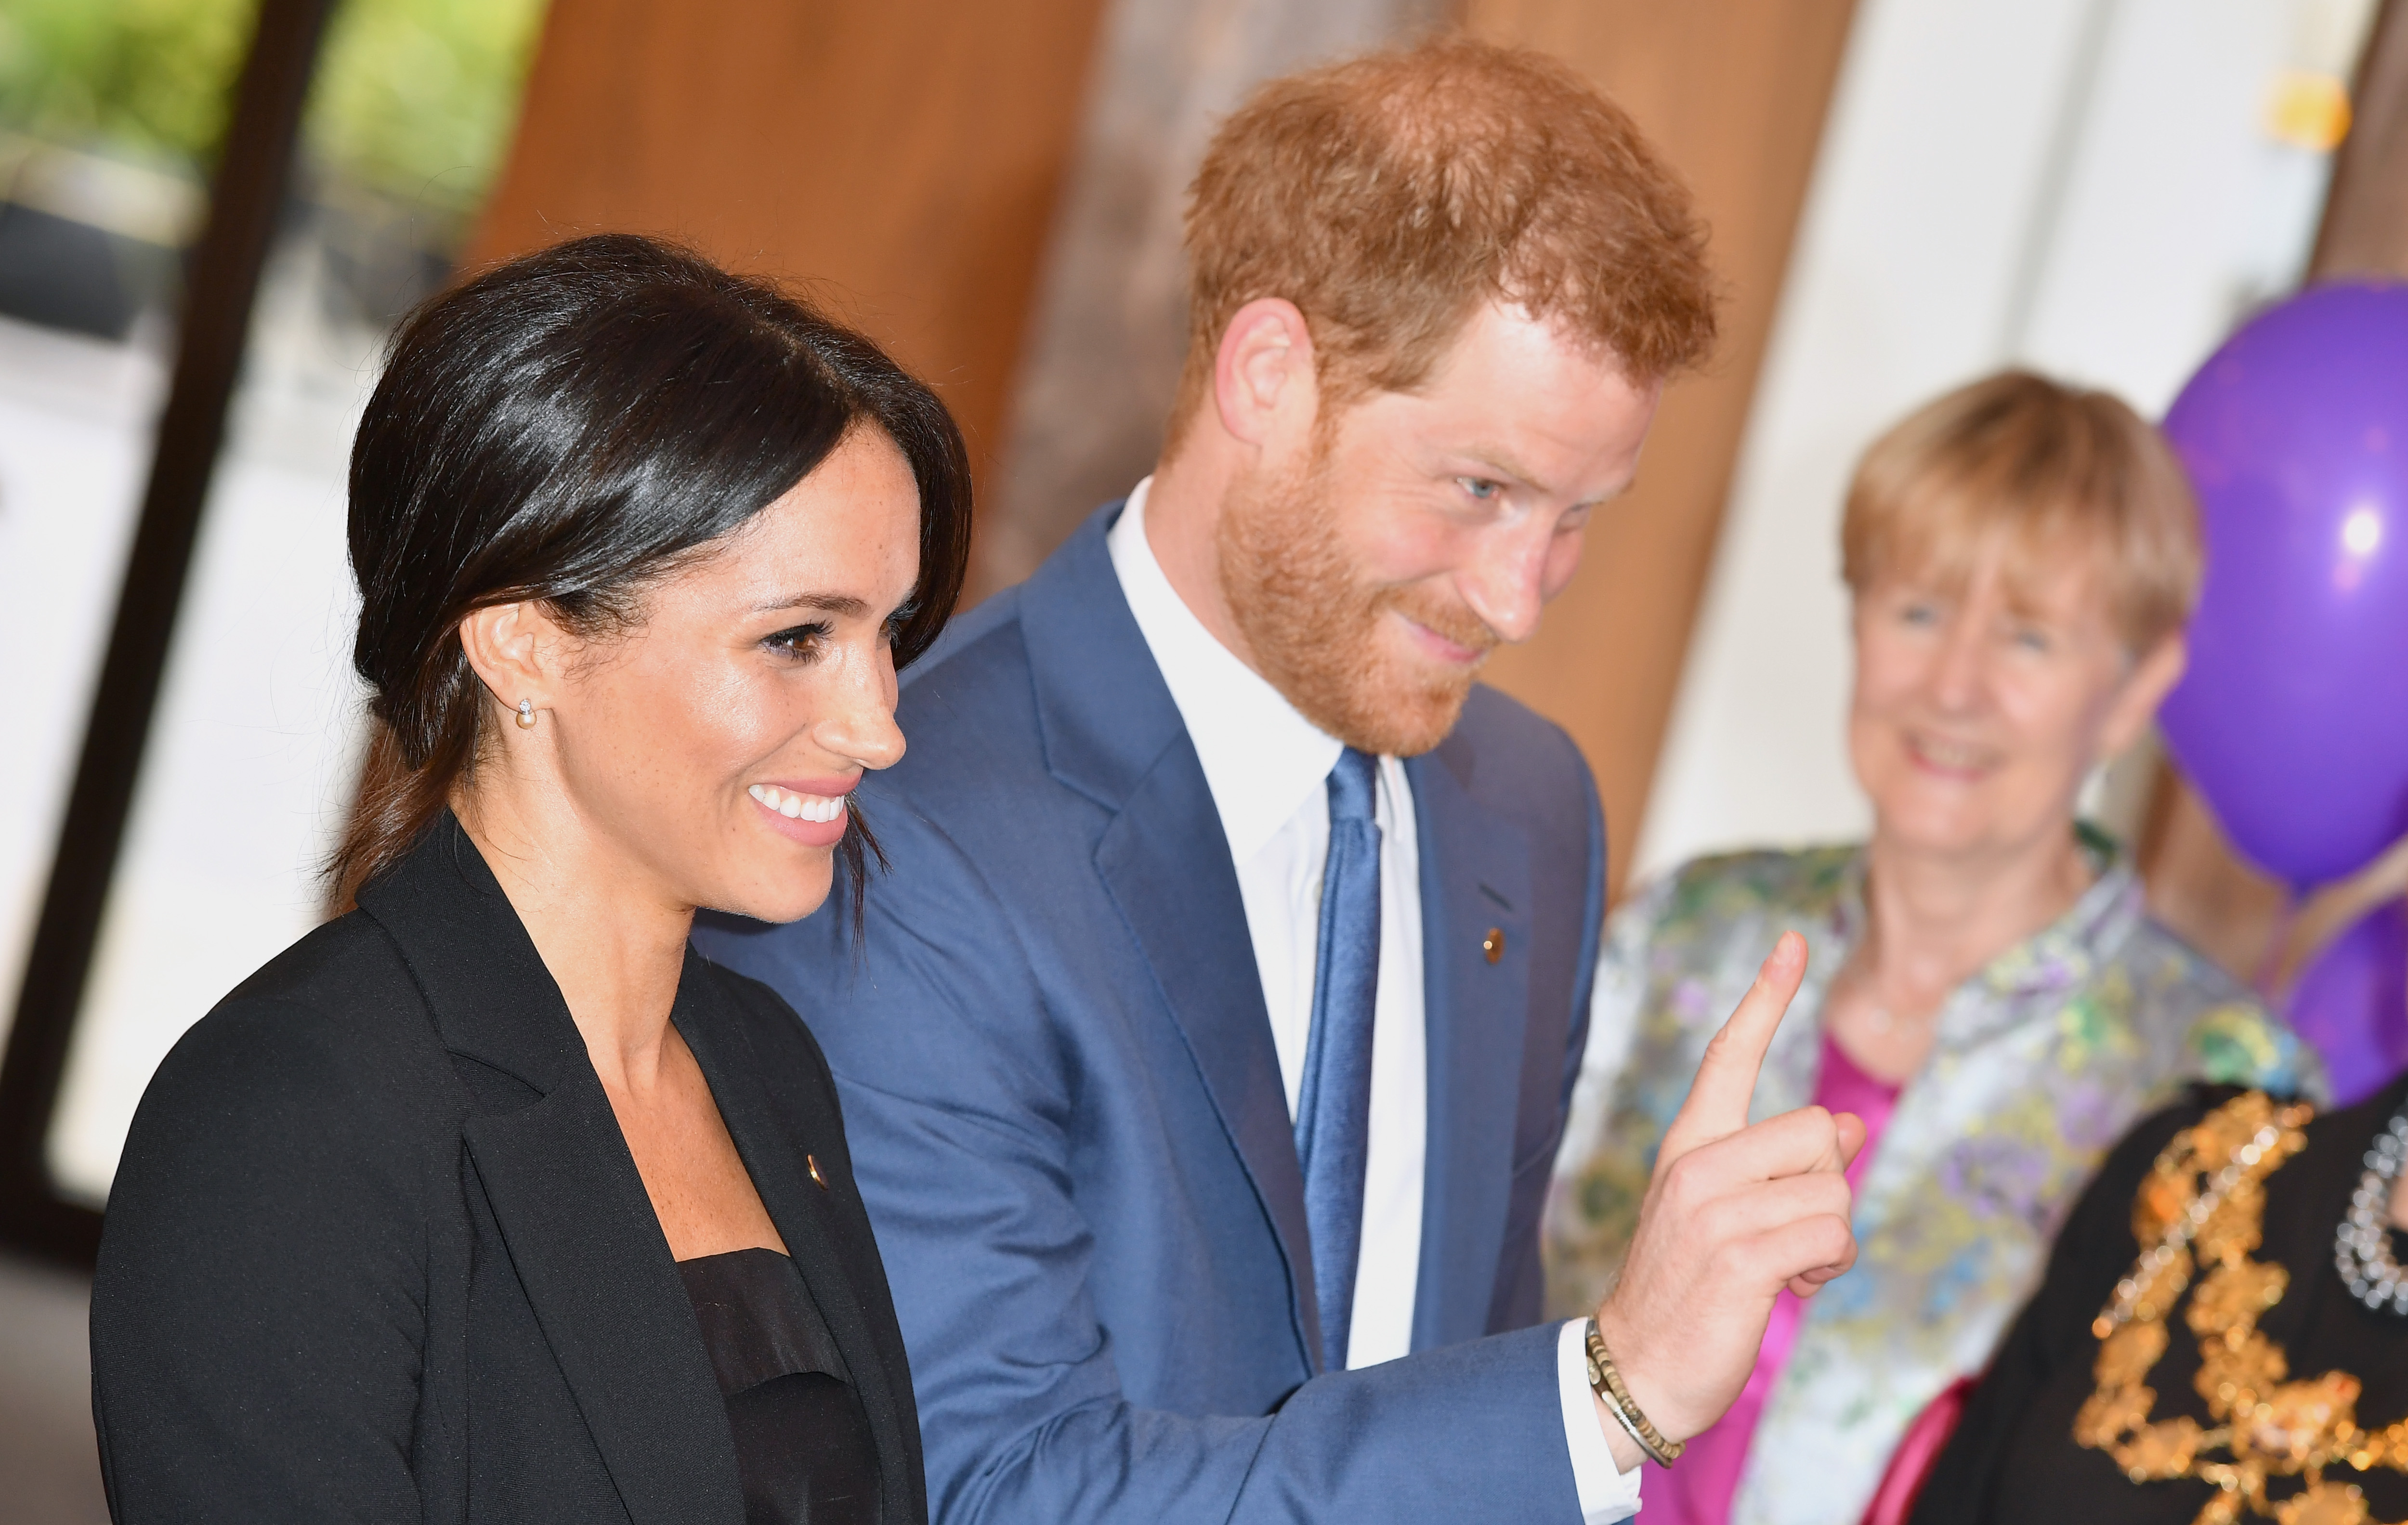 Harry and Meghan attend the WellChild Awards in London in 2018.